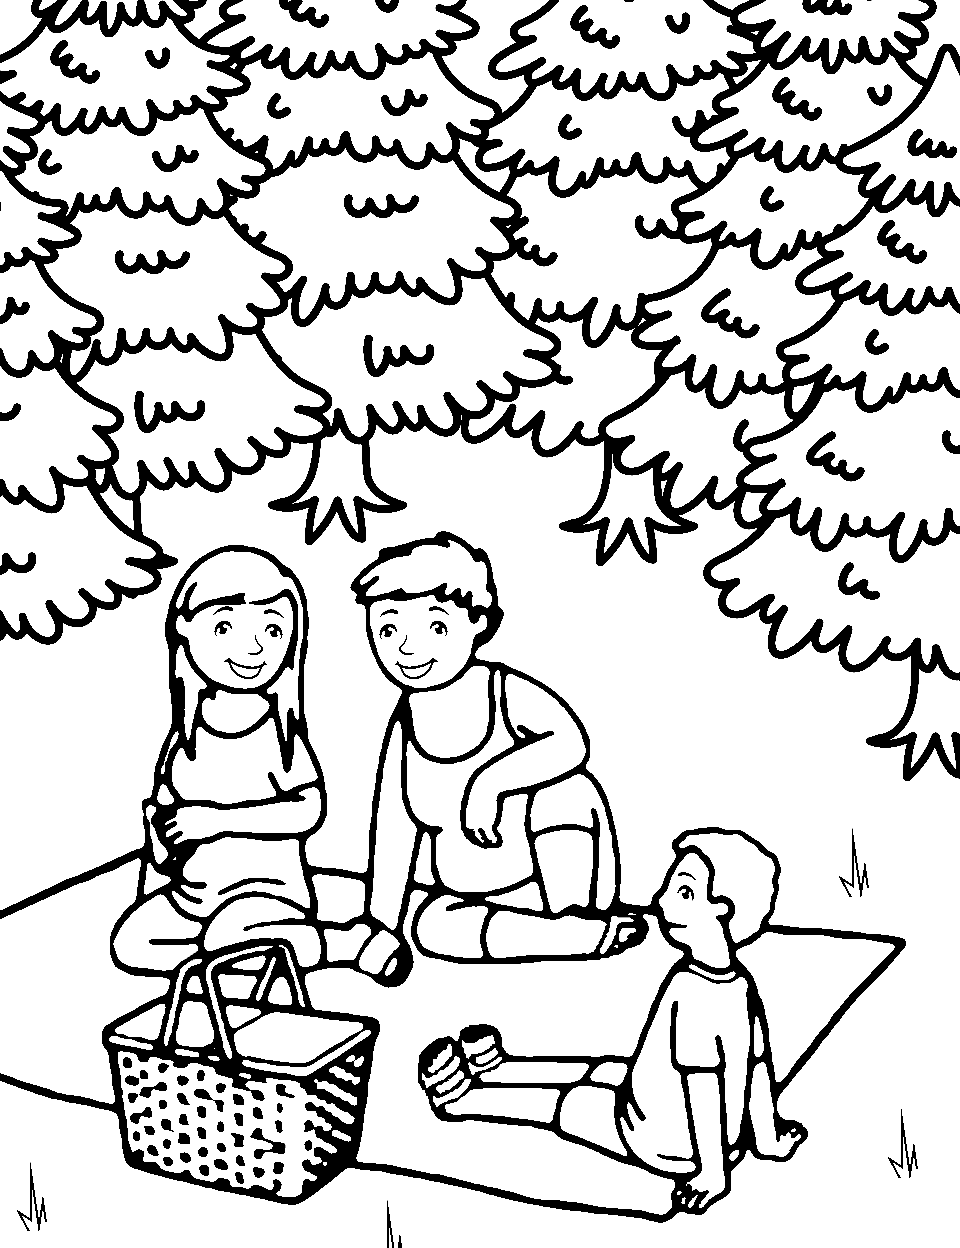 Family Picnic Fun Coloring Page - A family sitting on a blanket with a picnic basket and blanket.